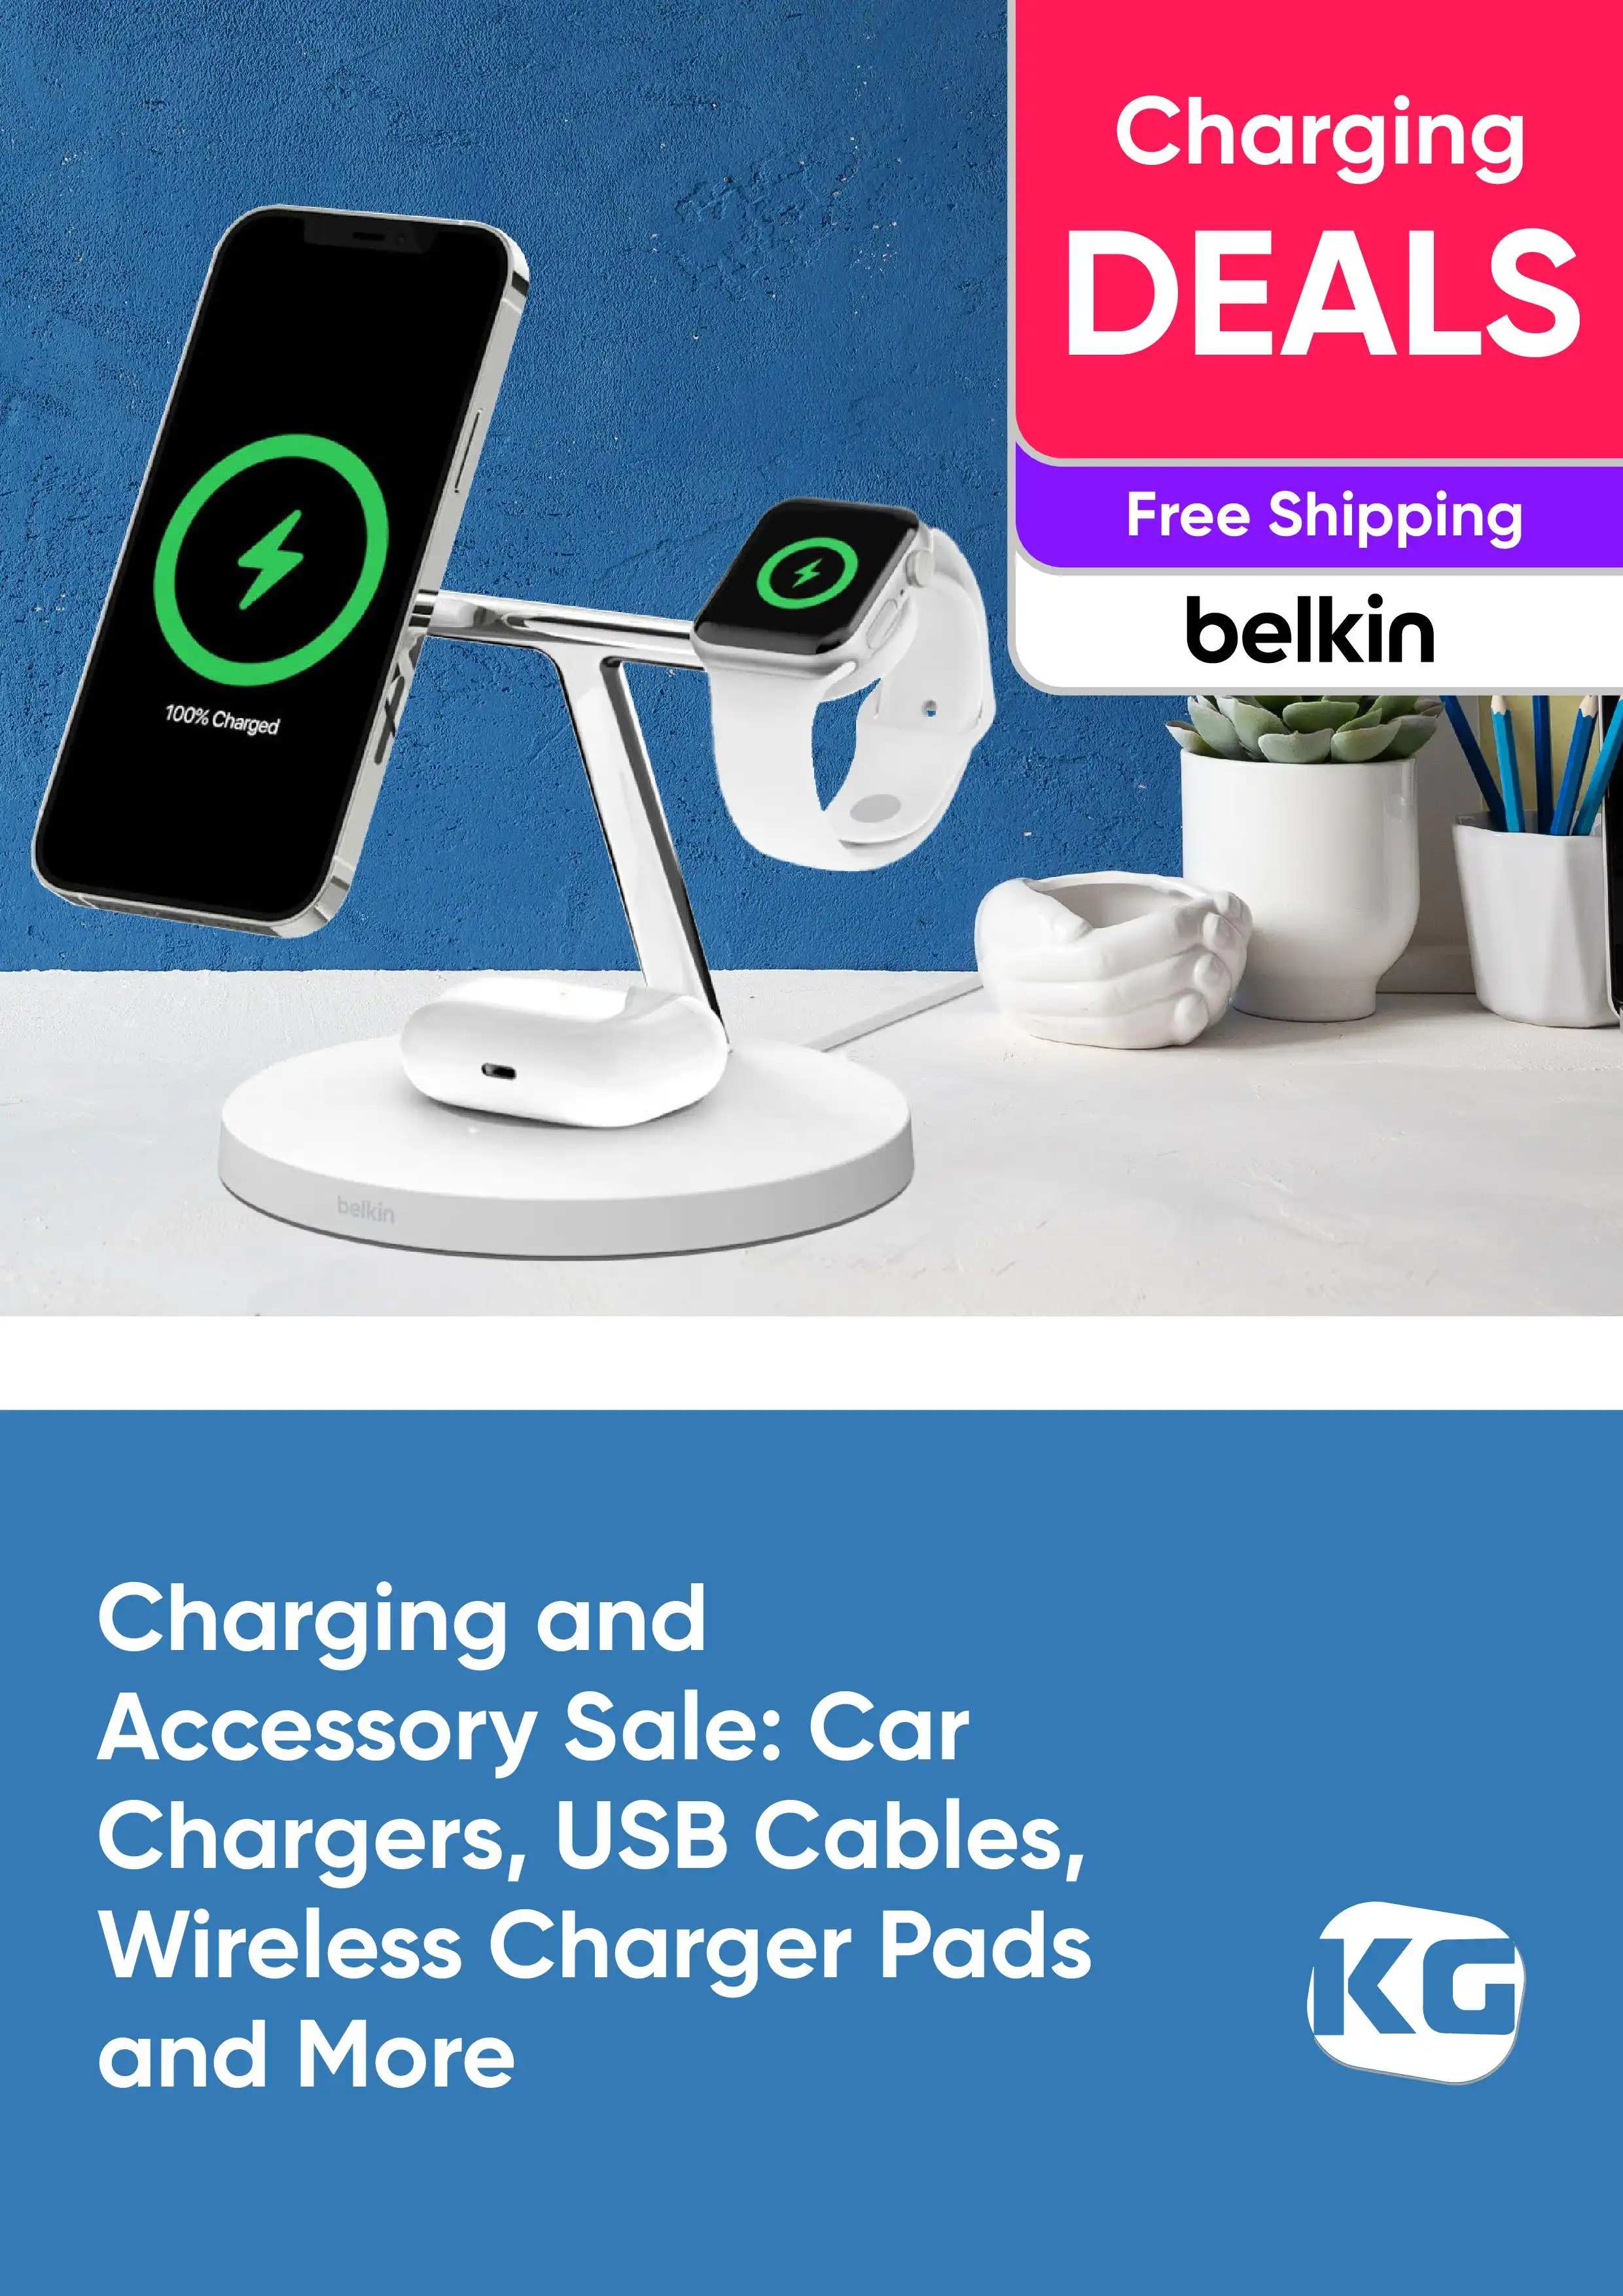 Charging and Accessory Sale - Car Chargers, USB Cables, Wireless Cherger Pads and More - Belkin